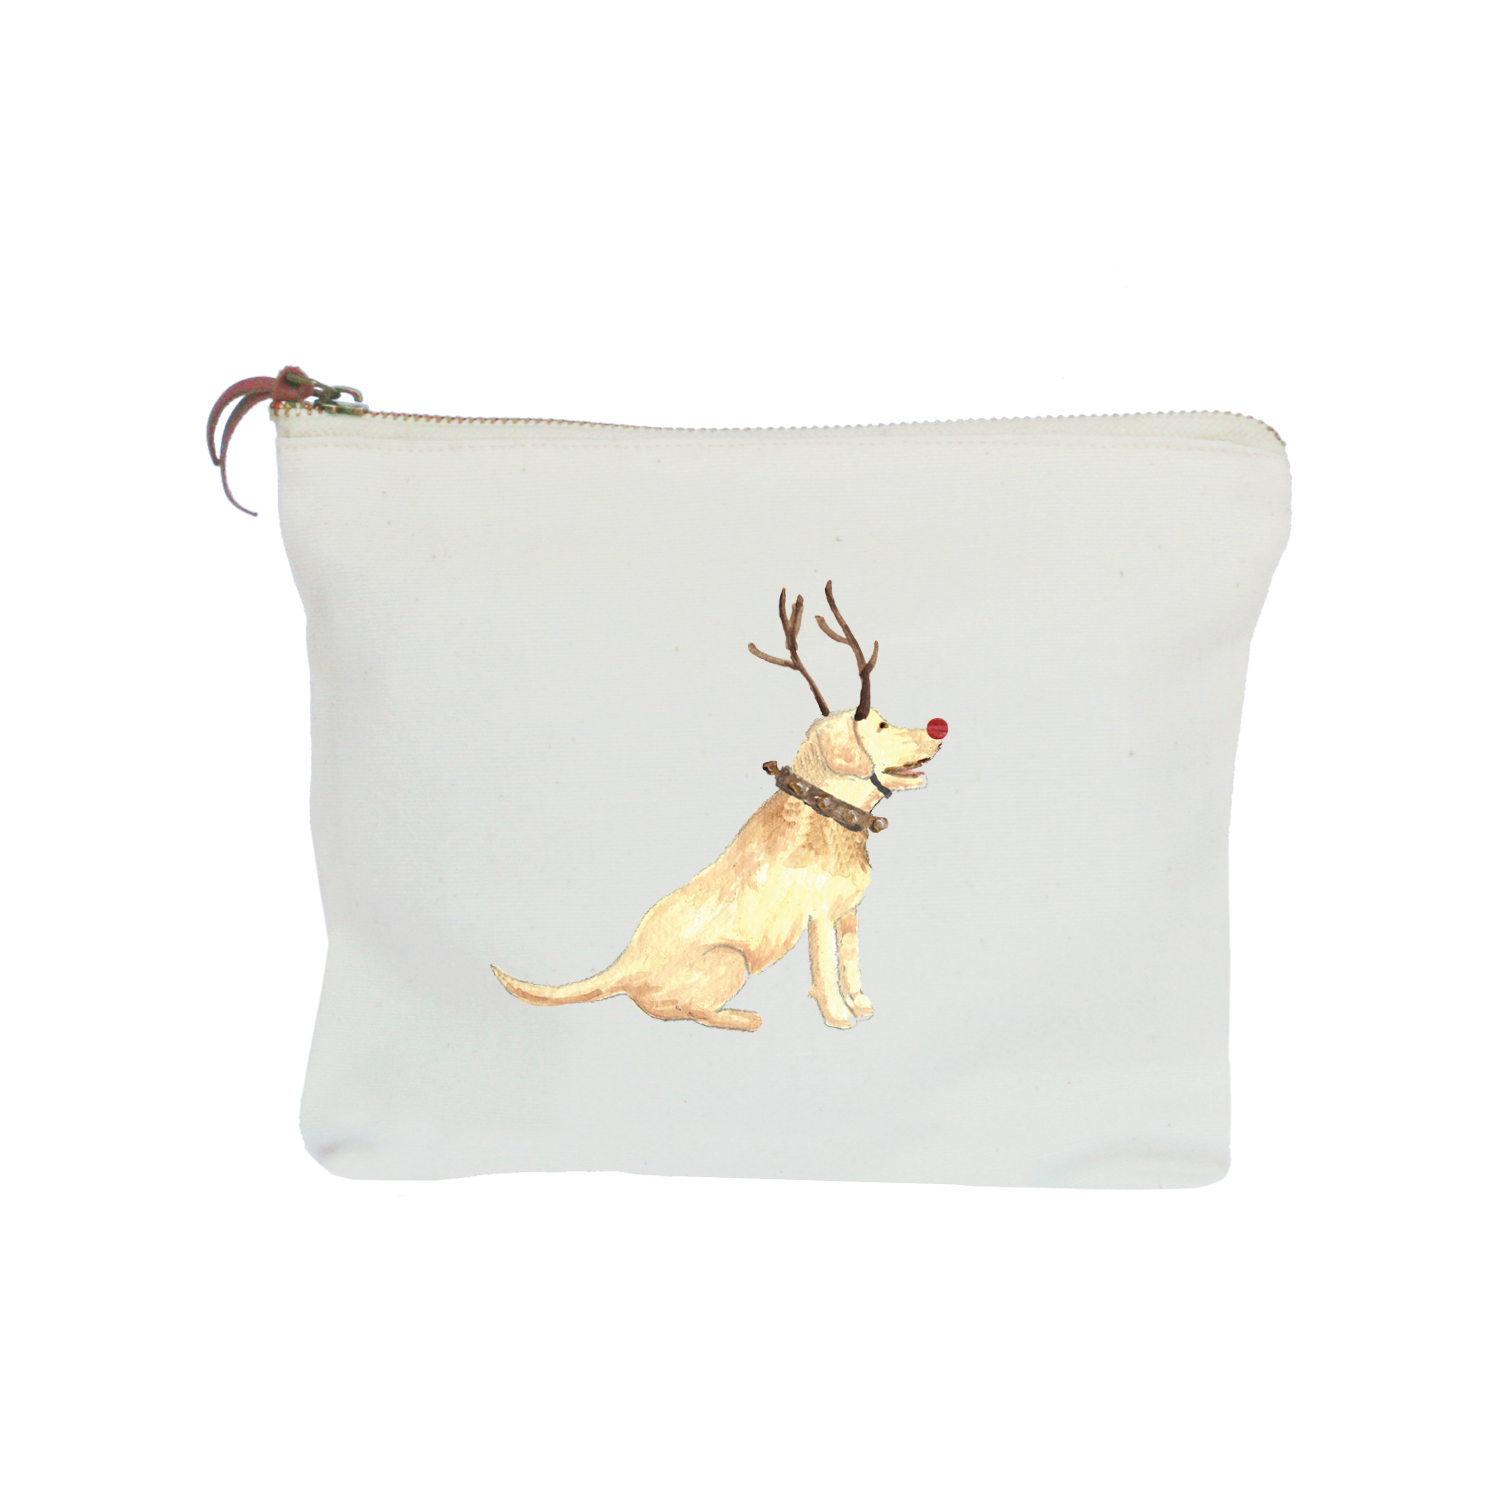 yellow lab with nose zipper pouch